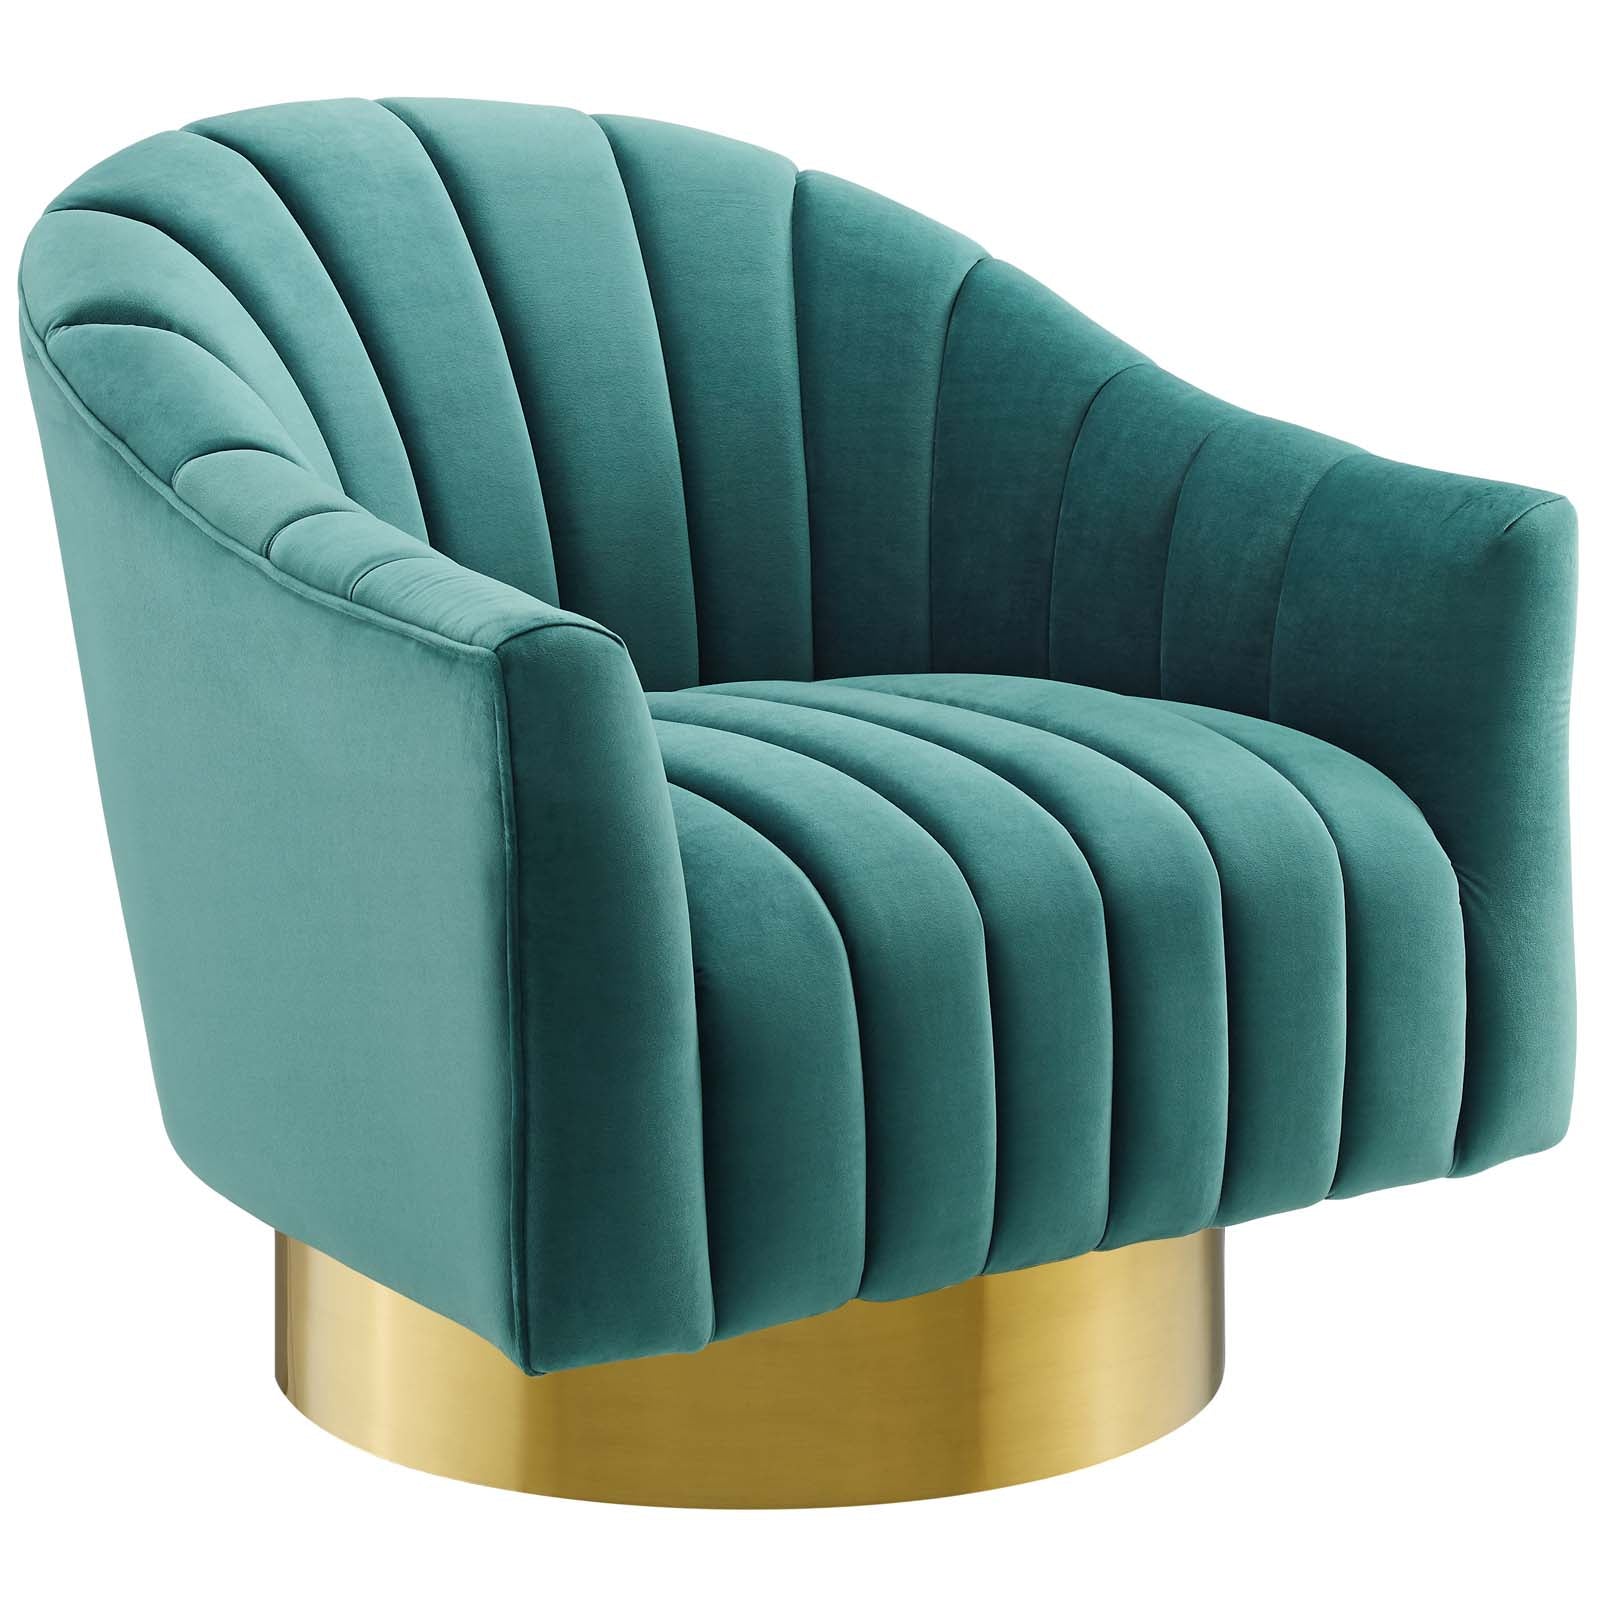 Modway Accent Chairs - Buoyant Swivel Chair Performance Velvet Set of 2 Teal